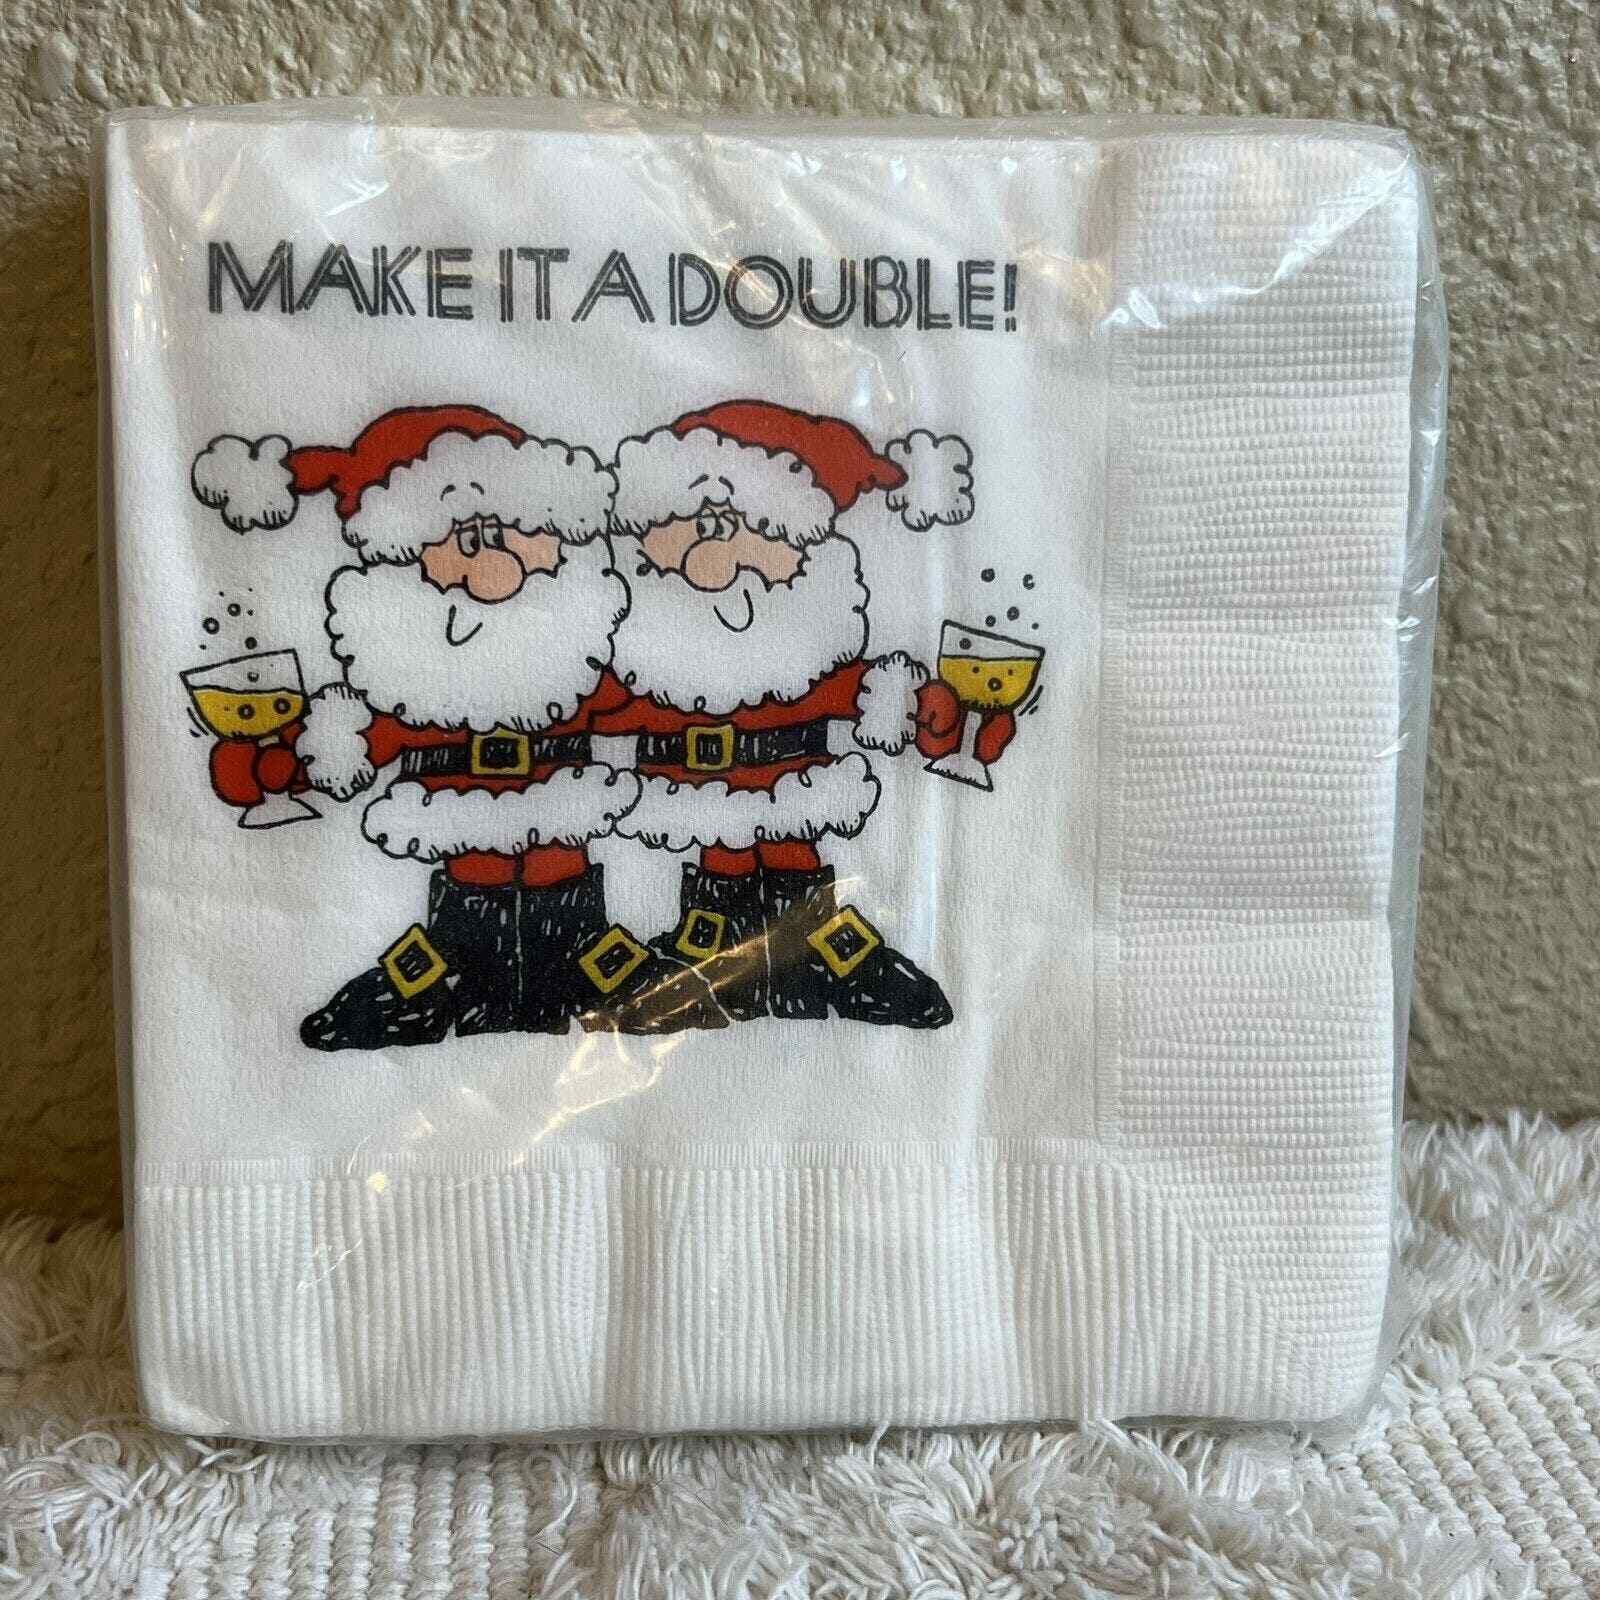 Vintage Christmas Make It A Double Santa Claus Napkins Beverage Package of 15